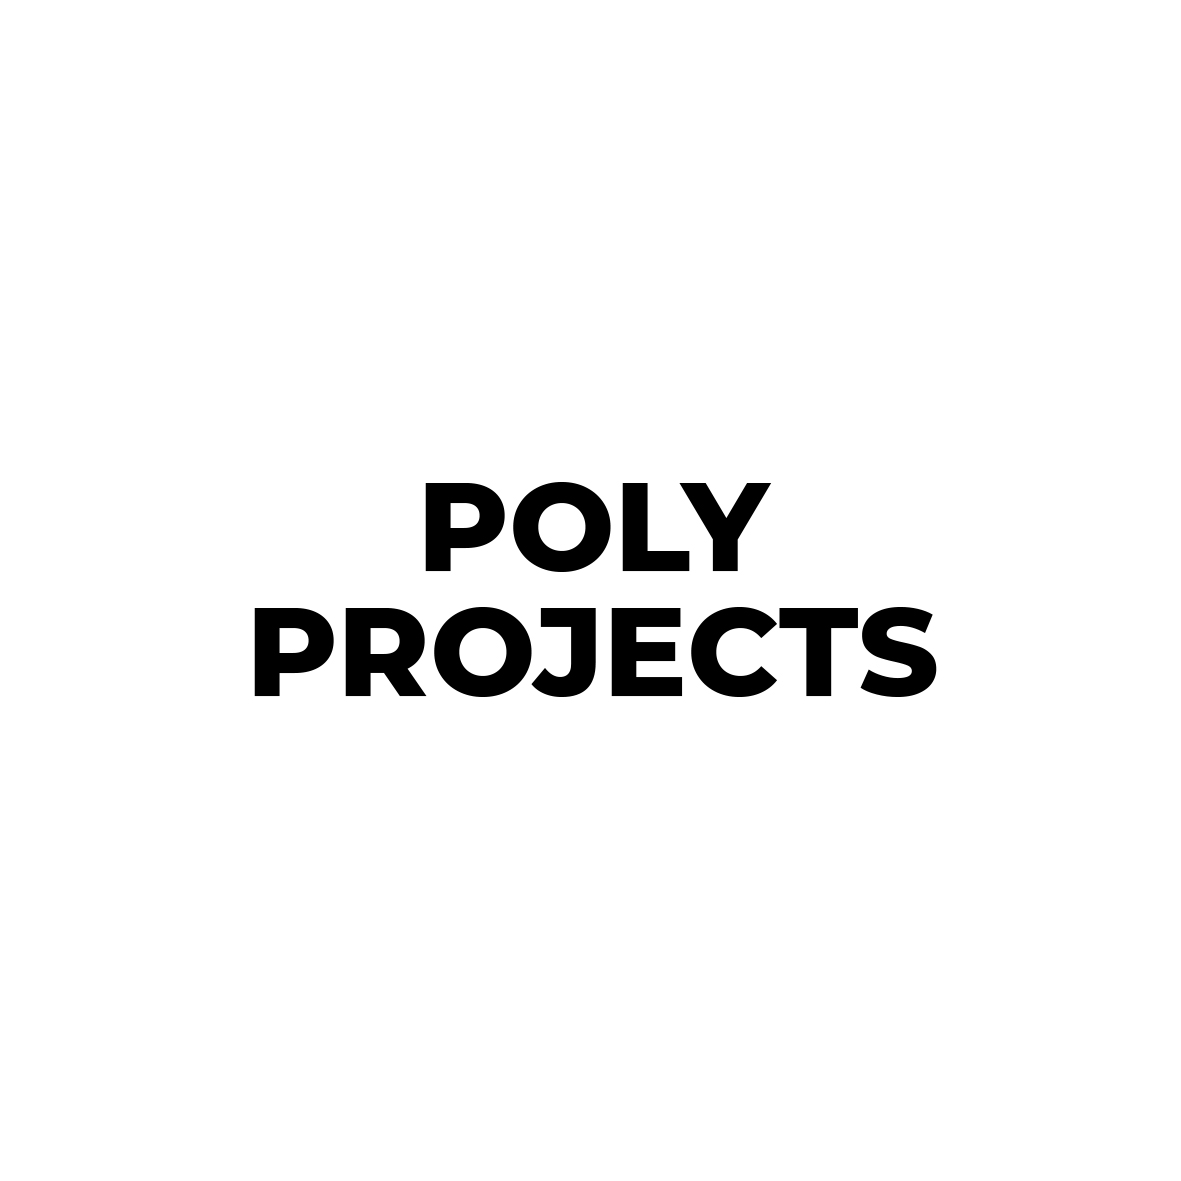 Poly Projects